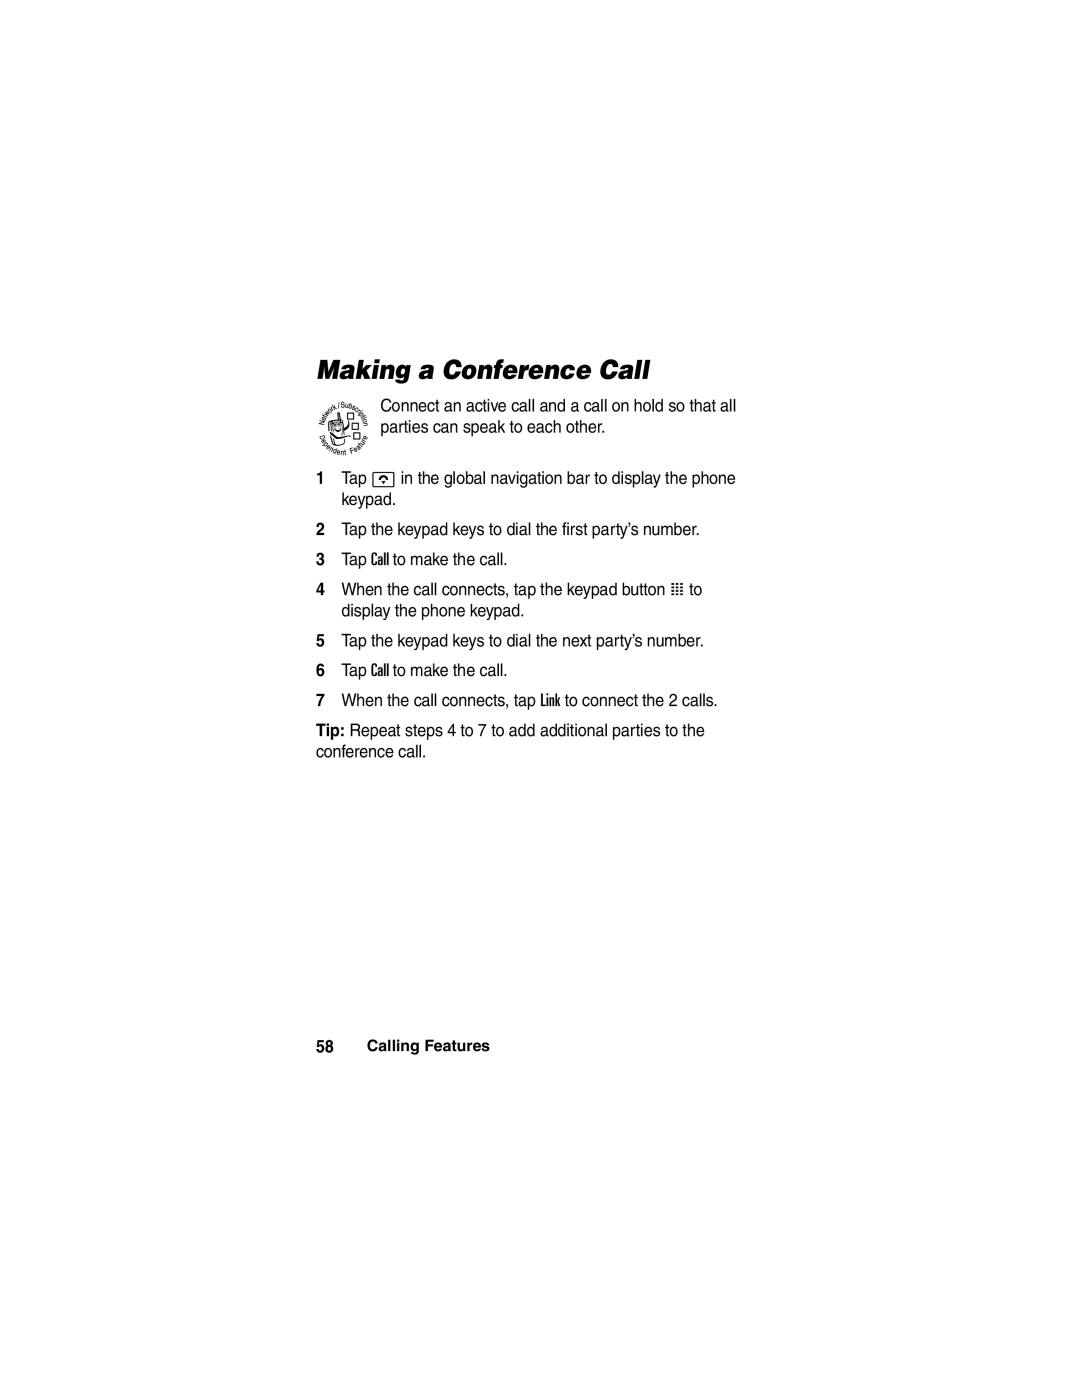 Motorola A780 manual Making a Conference Call, Calling Features 